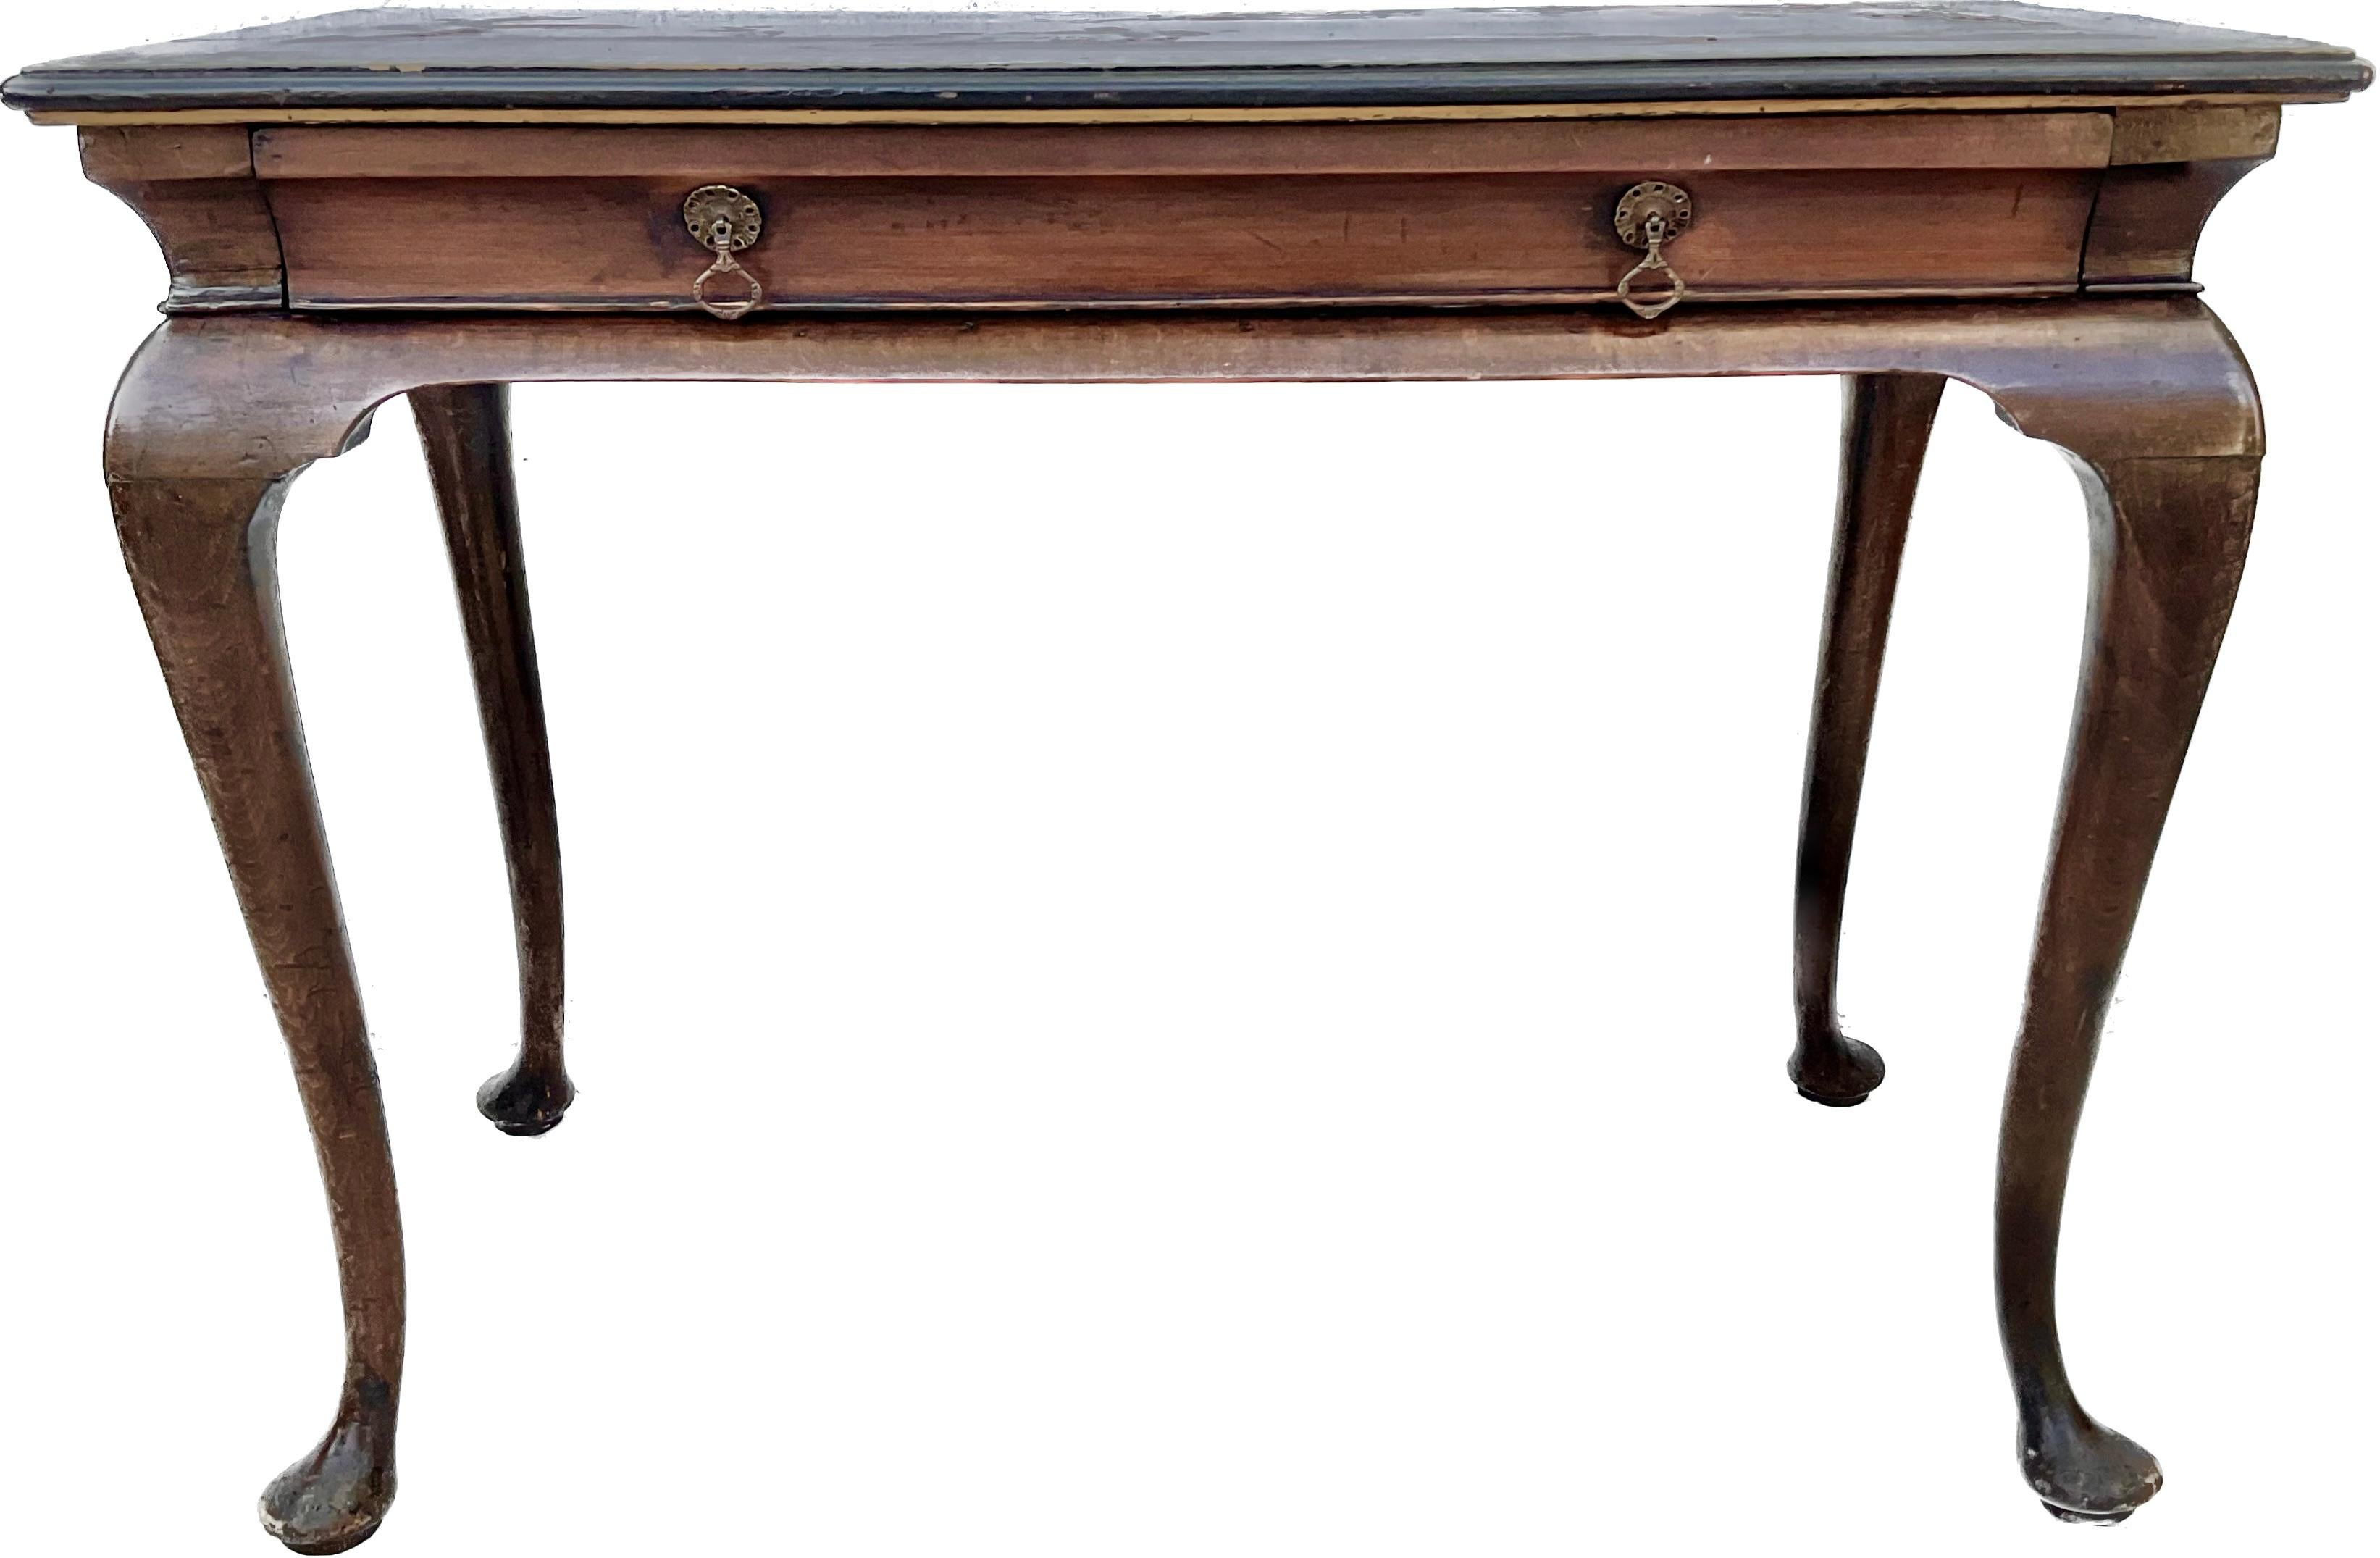 19th century chinoiserie decorated table. Carved and painted raised chinoiserie decorated top, cabriole legs with pad feet. Can be used as a center table, console table, writing or sofa table. Has one drawer.